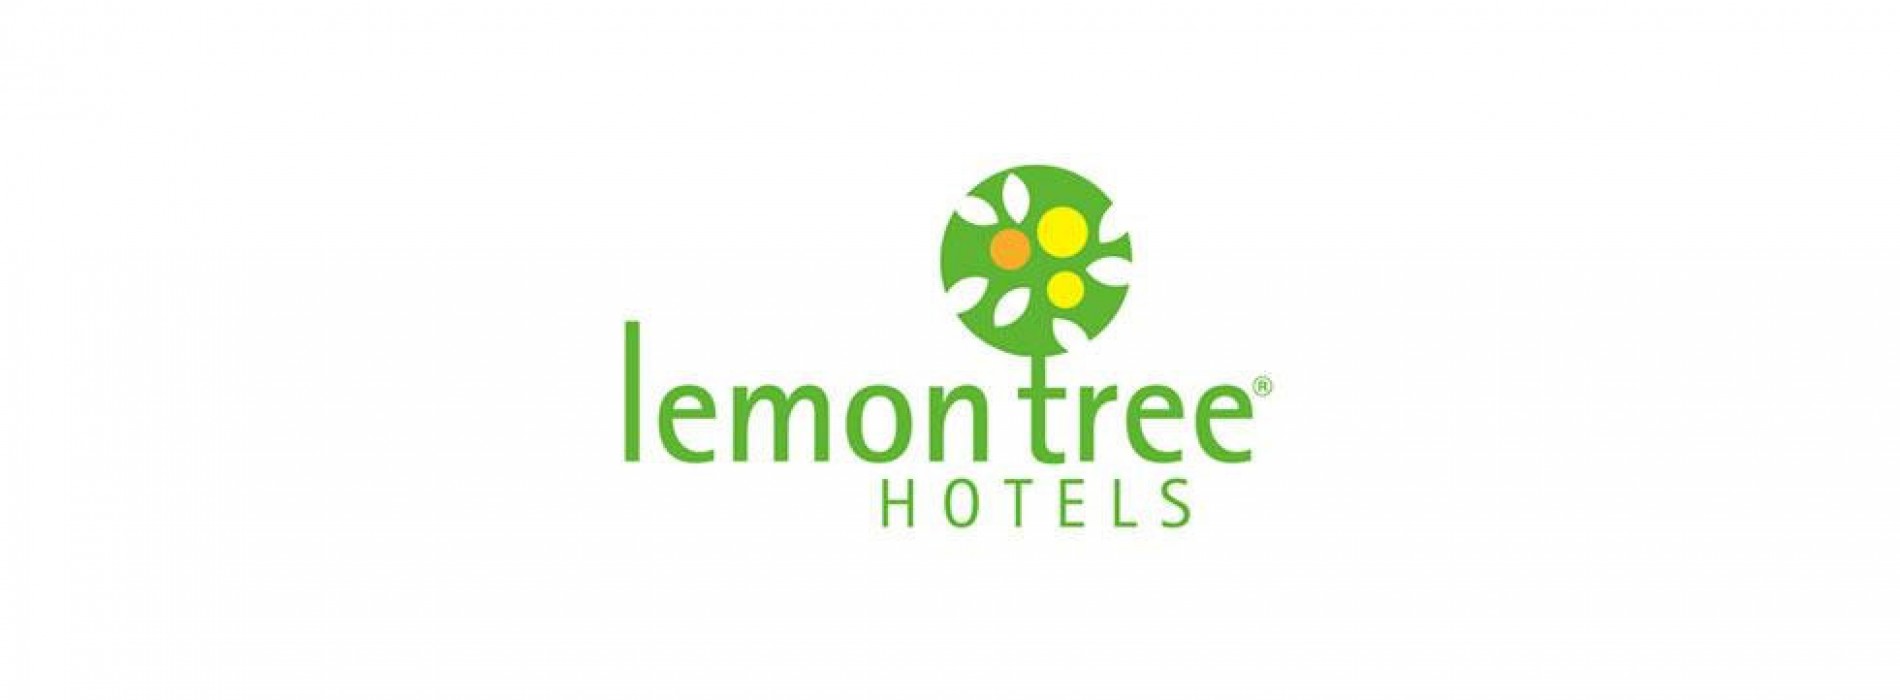 Lemon Tree Hotel Company appoints Vikramjit Singh as President and Chief Revenue Officer